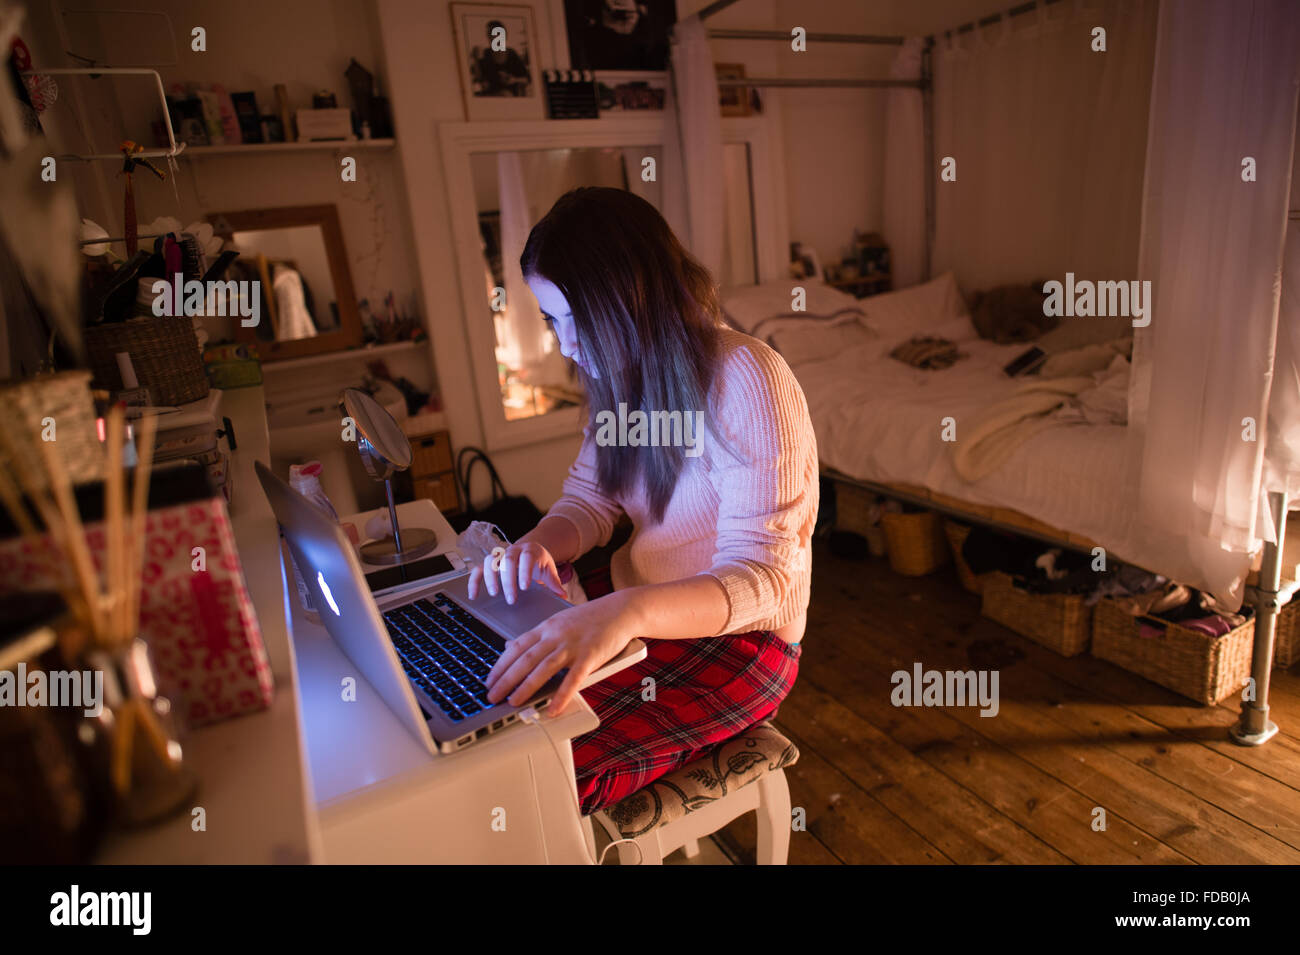 A 17 year old teenage girl on her Apple laptop computer in her bedroom at night, checking her Facebook page and sending messages to her friends, UK Stock Photo